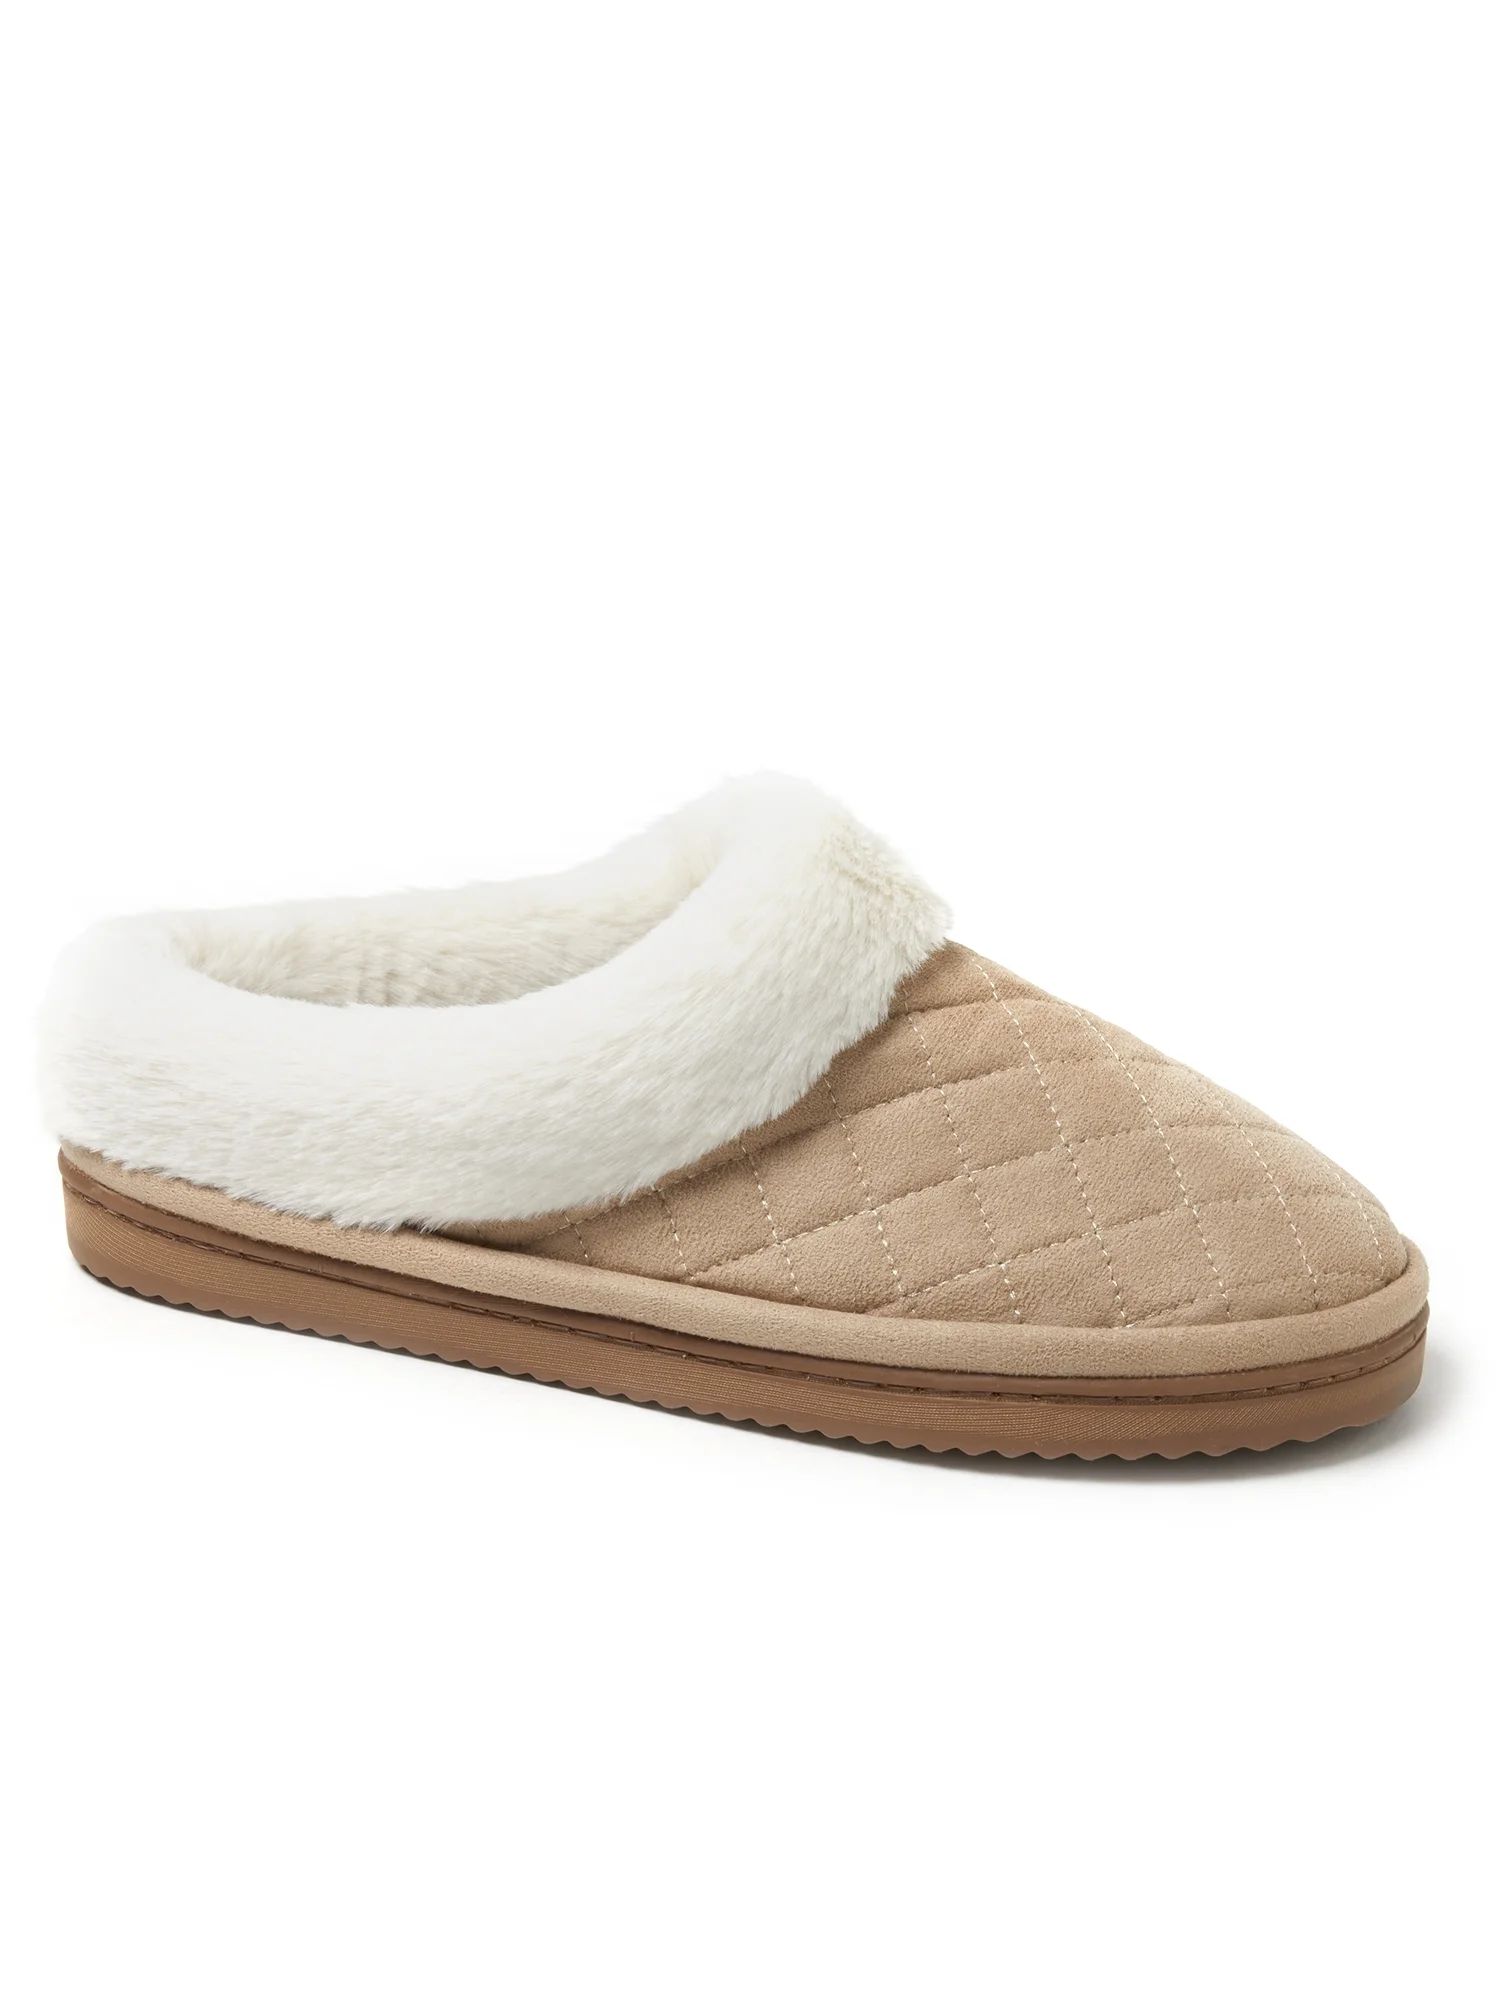 Dearfoams Cozy Comfort Women's Quilted Clog Slippers, Sizes 5-12 | Walmart (US)